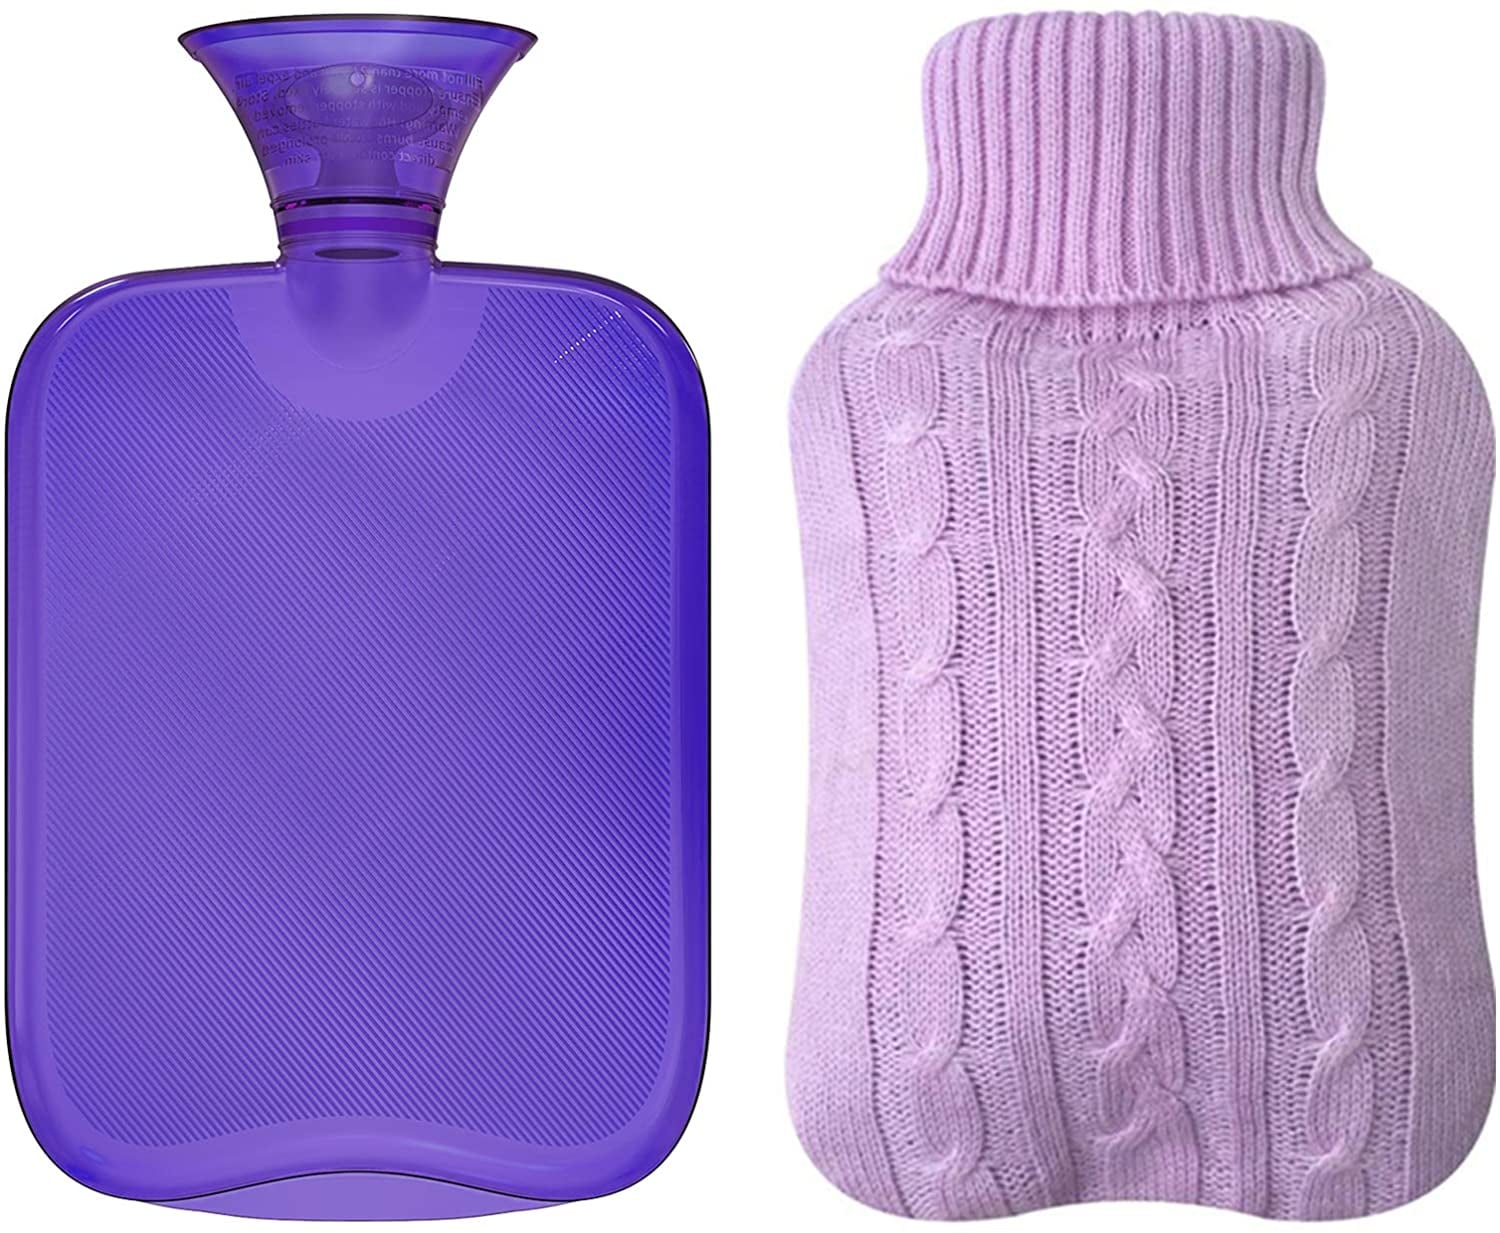 Hot Water Bottles For Period Cramps